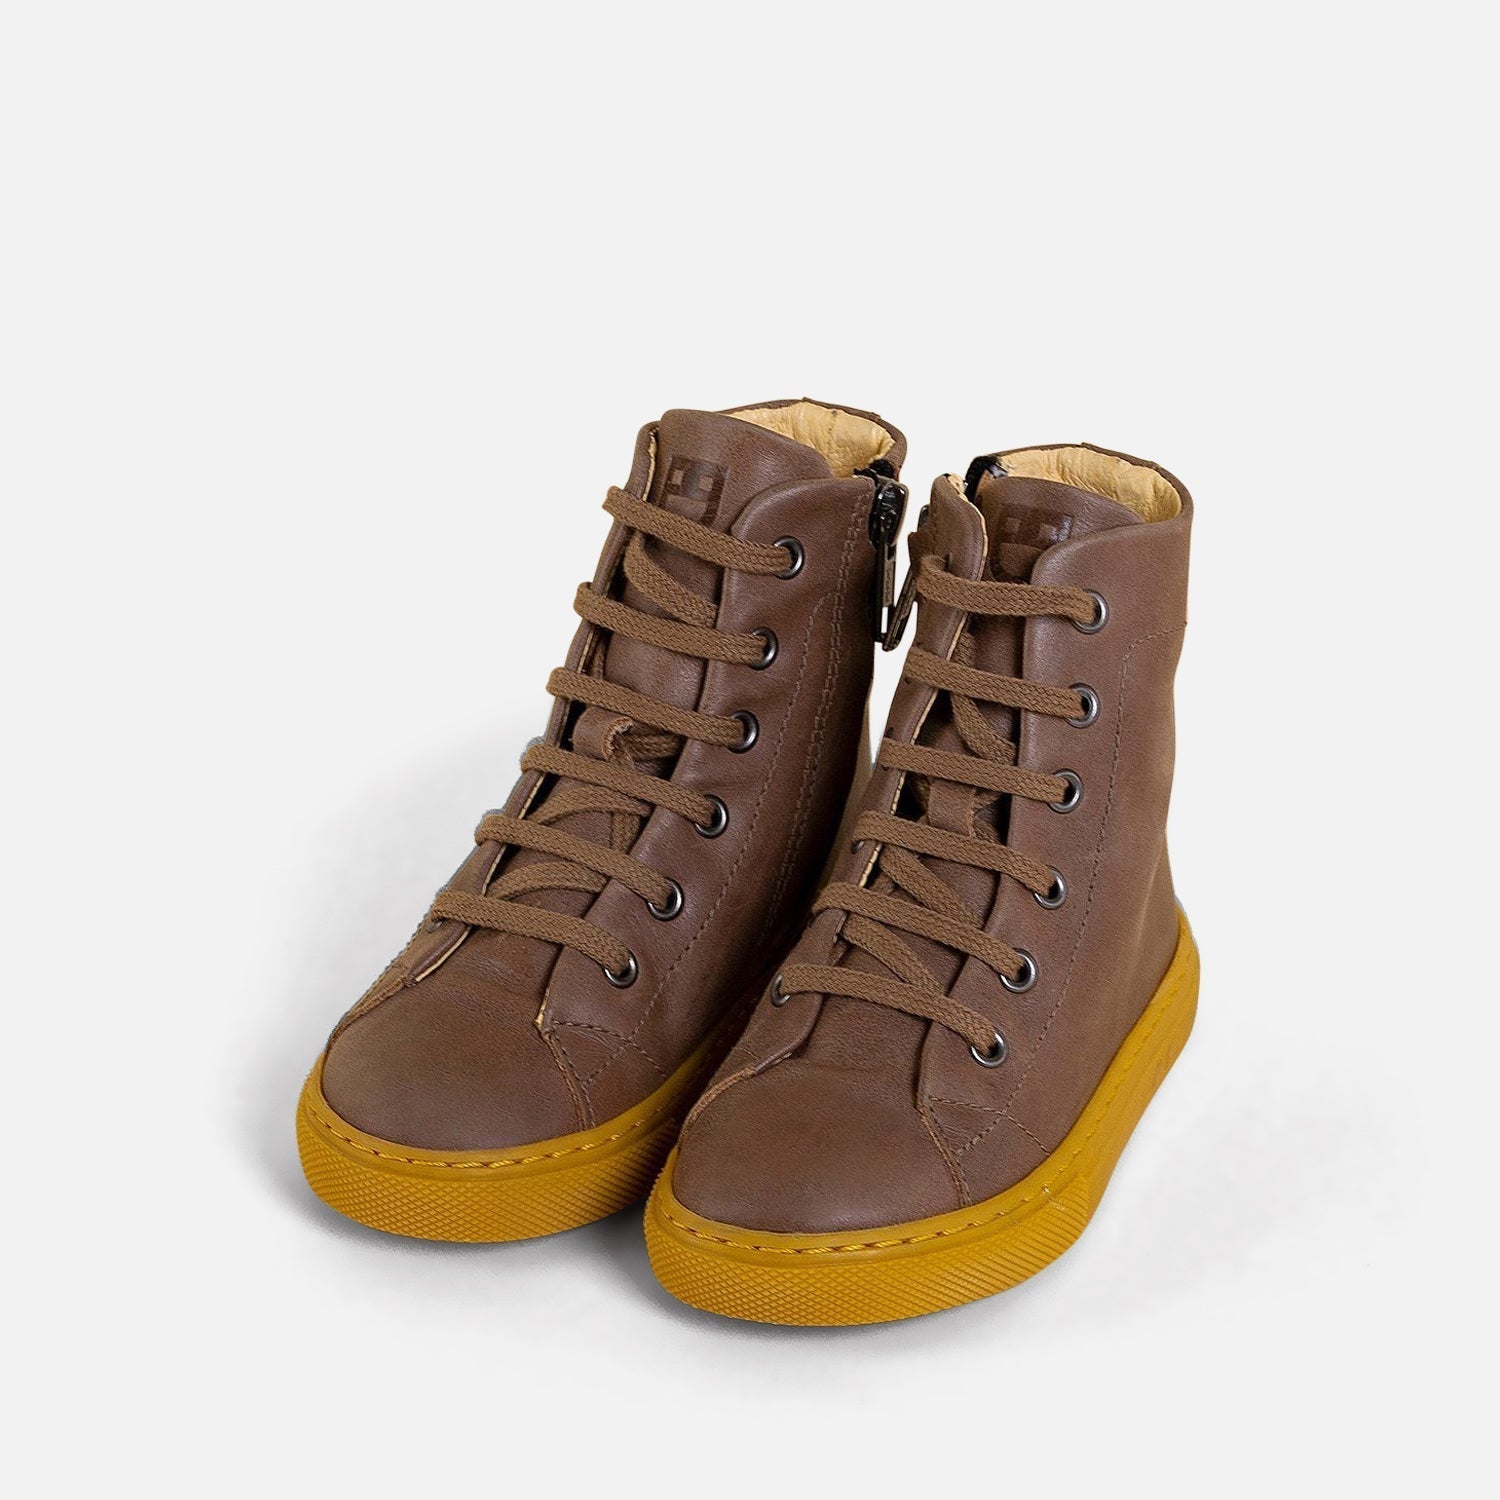 Camel High Top Sneakers Shoes Dulis Shoes 